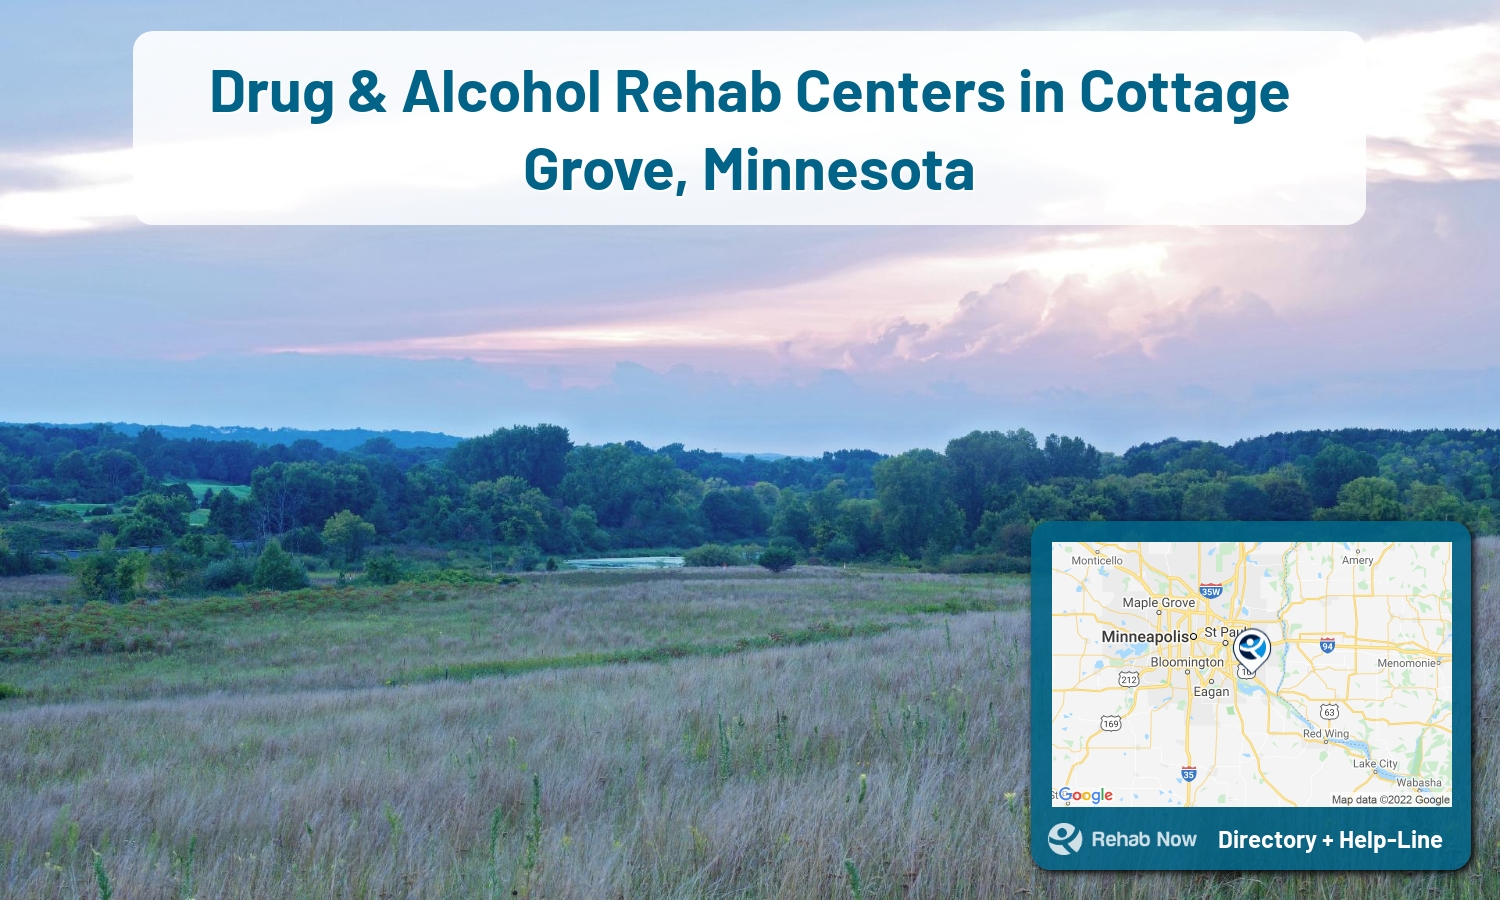 List of alcohol and drug treatment centers near you in Cottage Grove, Minnesota. Research certifications, programs, methods, pricing, and more.